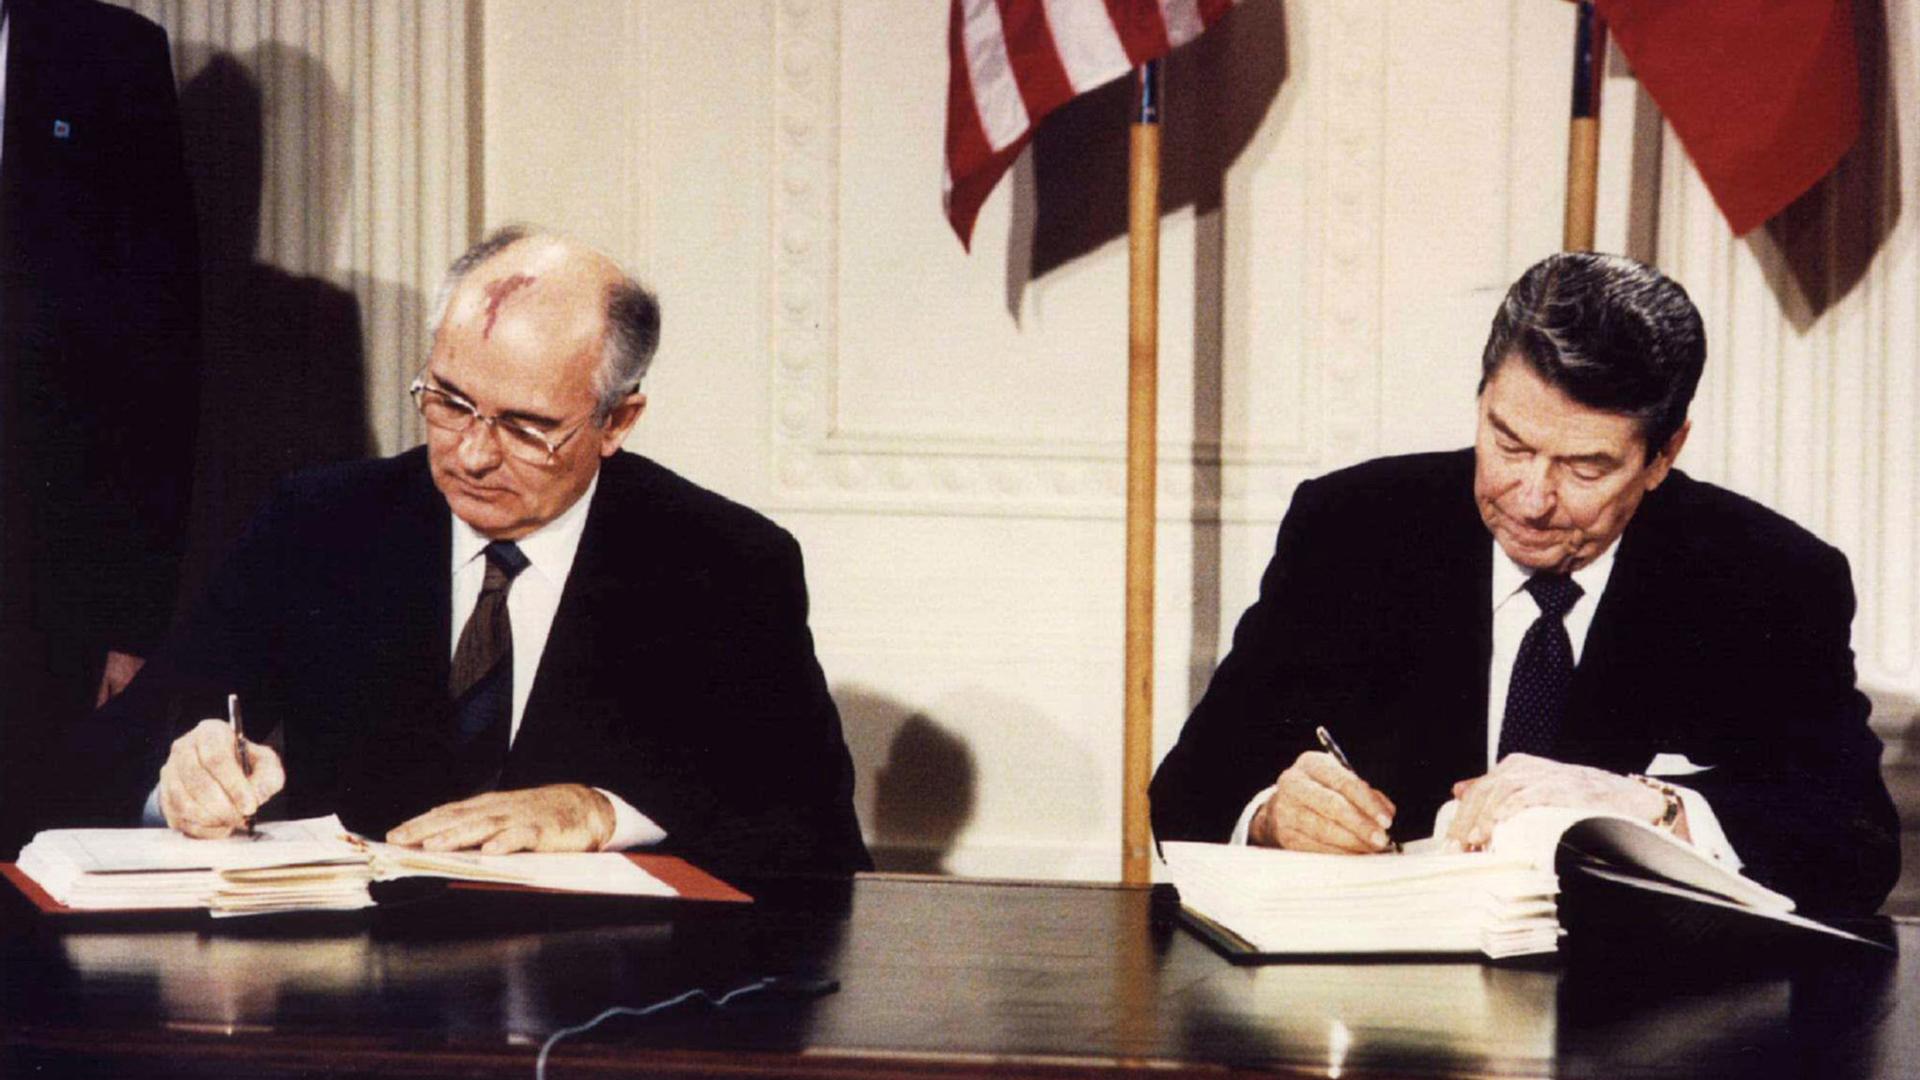 US President Ronald Reagan and Soviet President Mikhail Gorbachev signing the Intermediate-Range Nuclear Forces (INF) treaty at the White House, on December 8 1987.